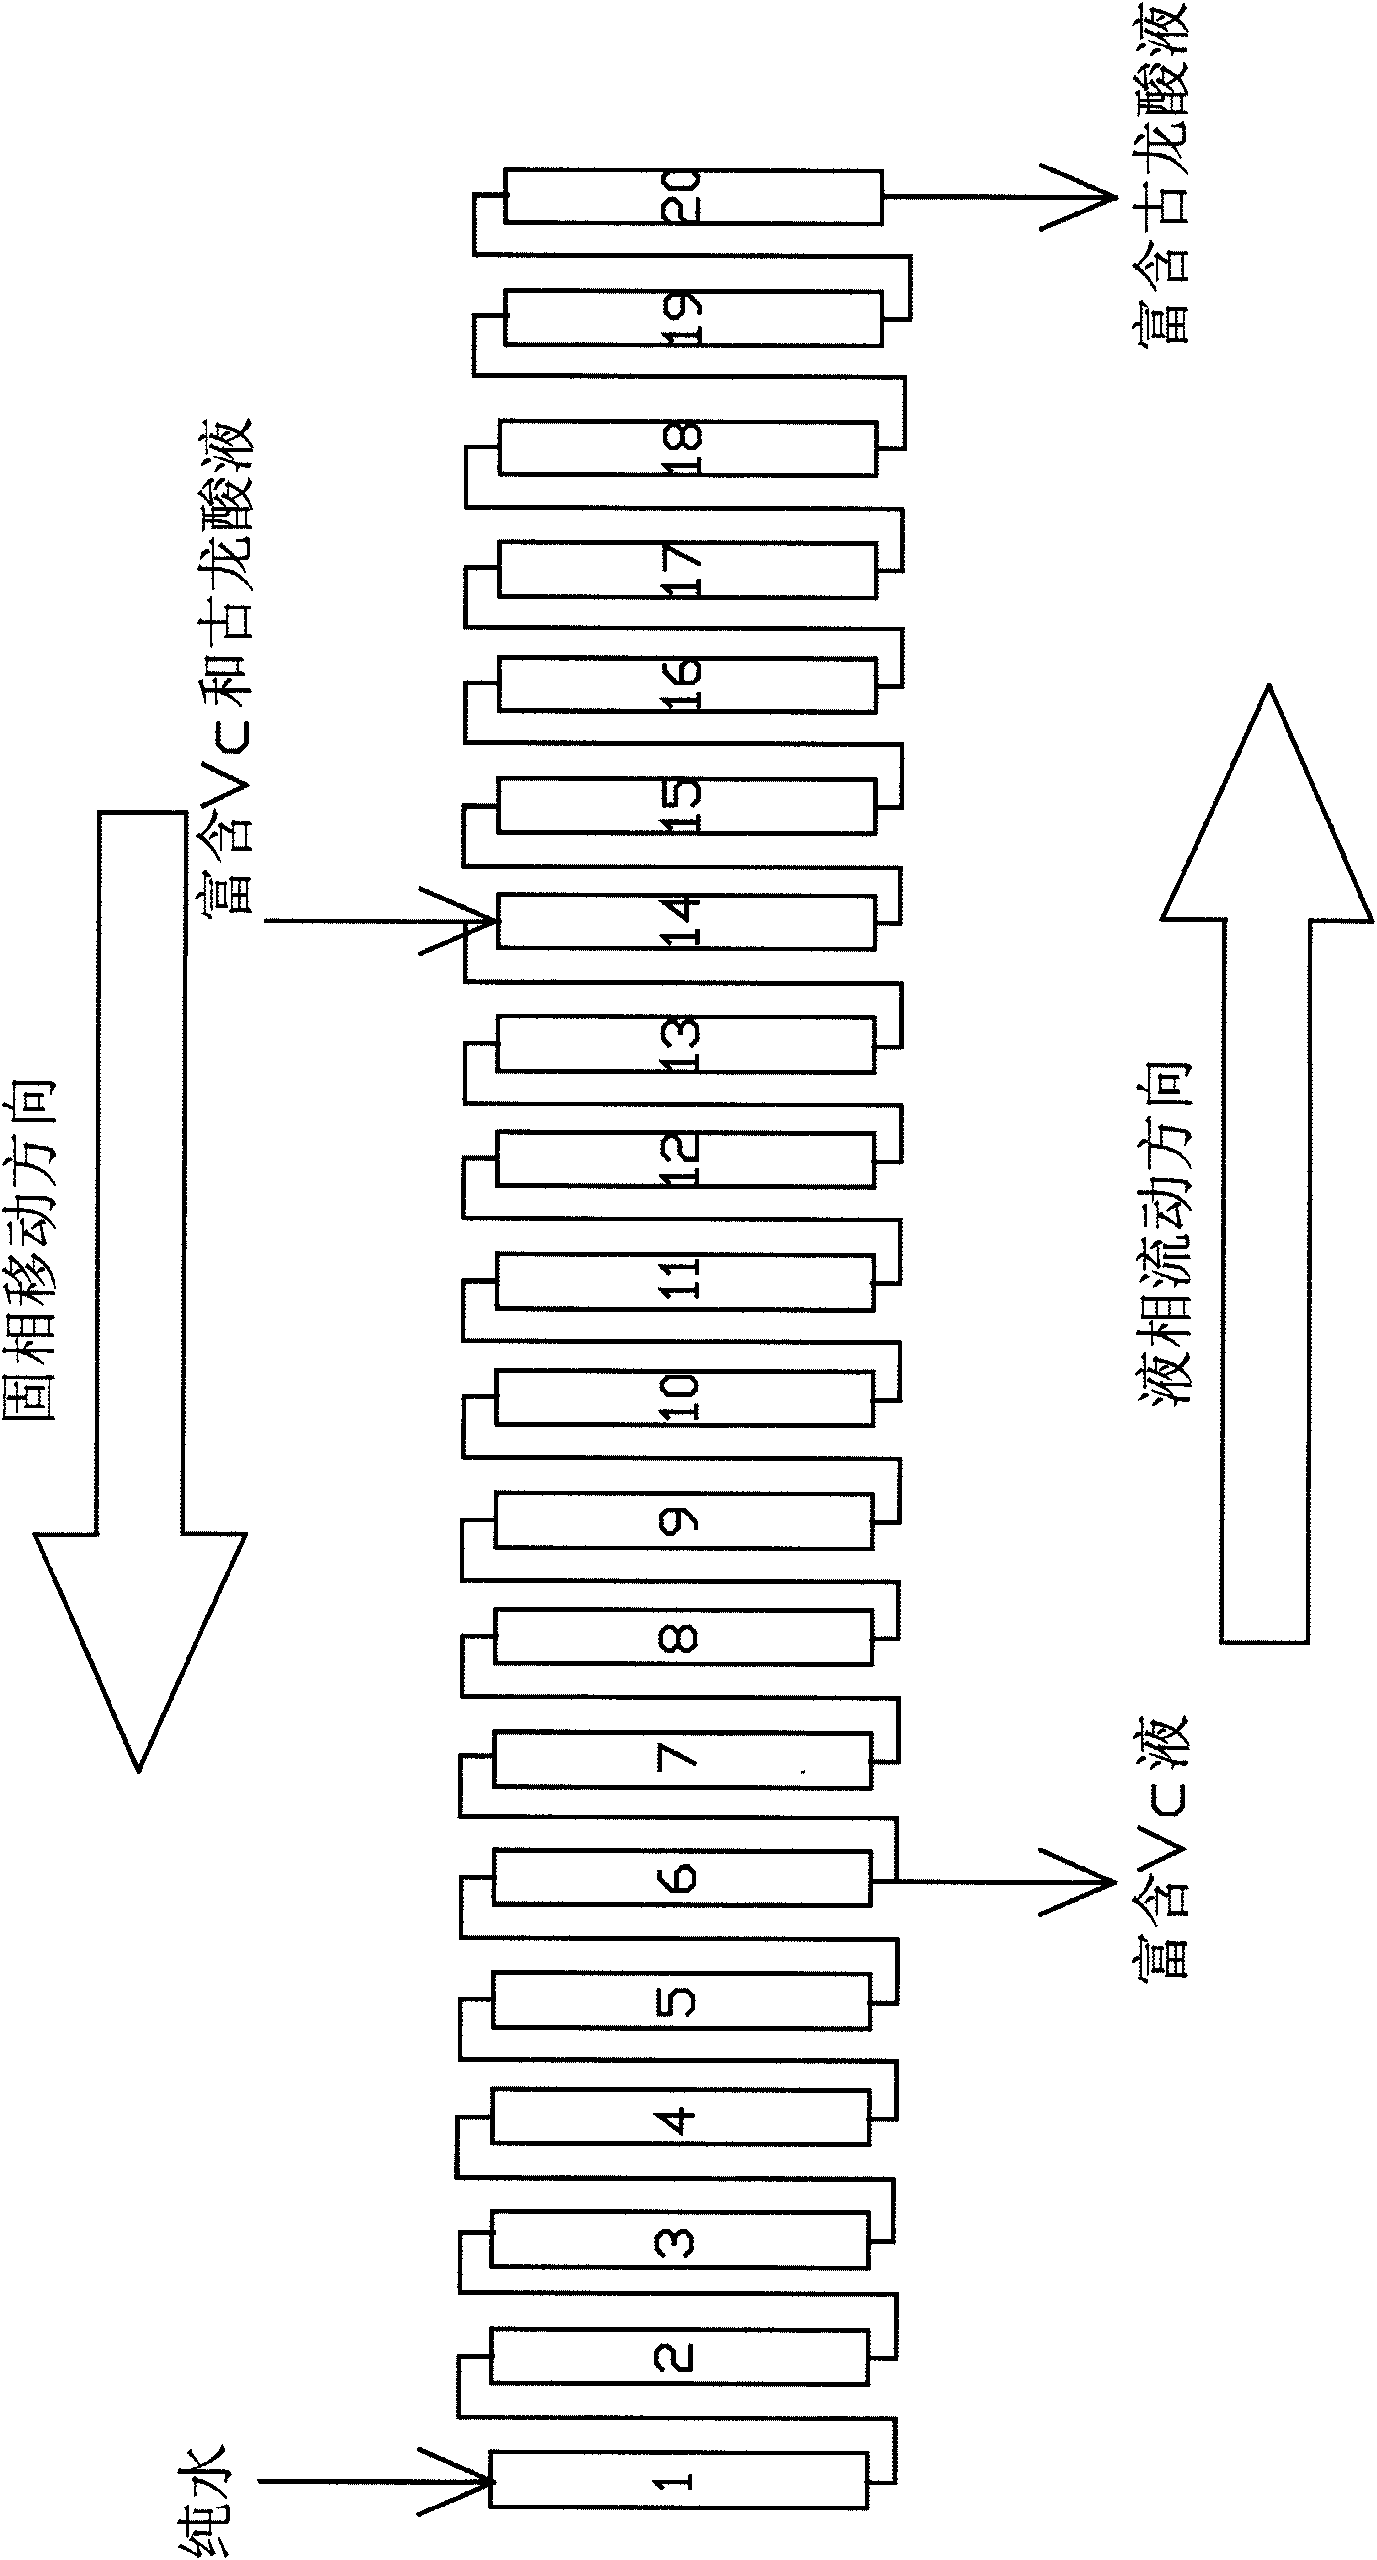 Method for separating solution rich in gulonic acid and vitamin C by ion exclusion chromatography